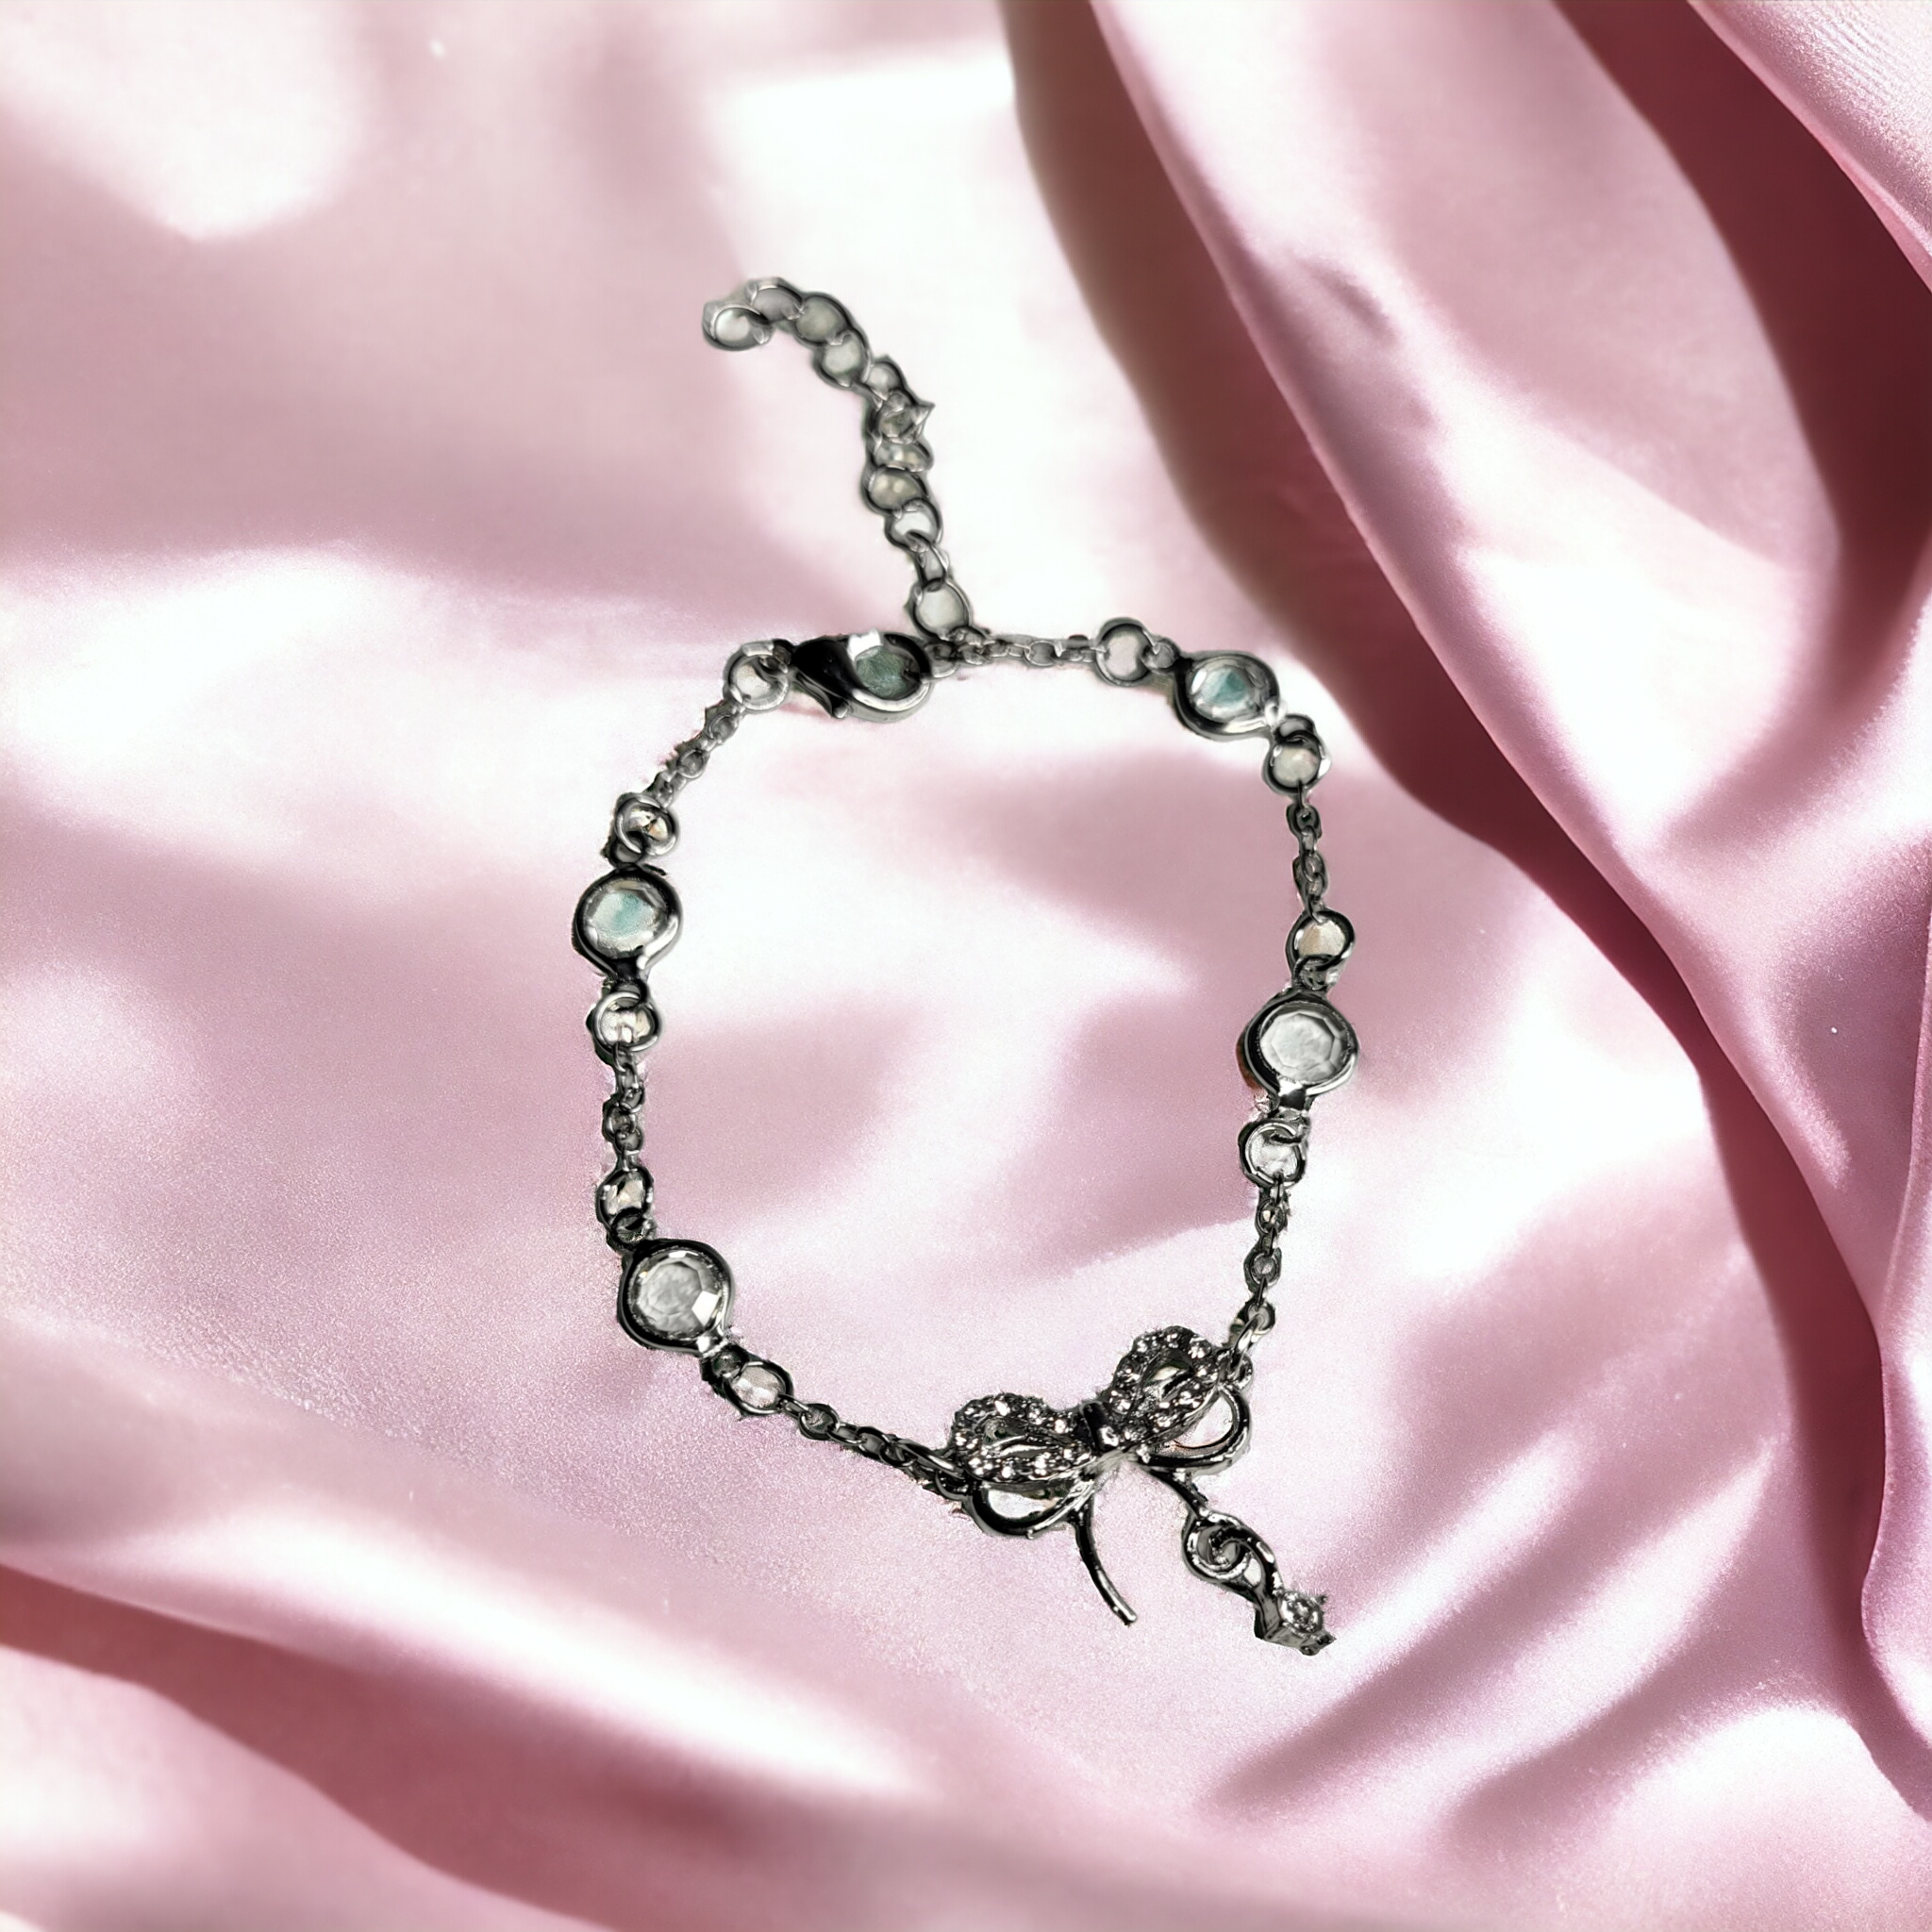 Silver Bracelet with a Bow